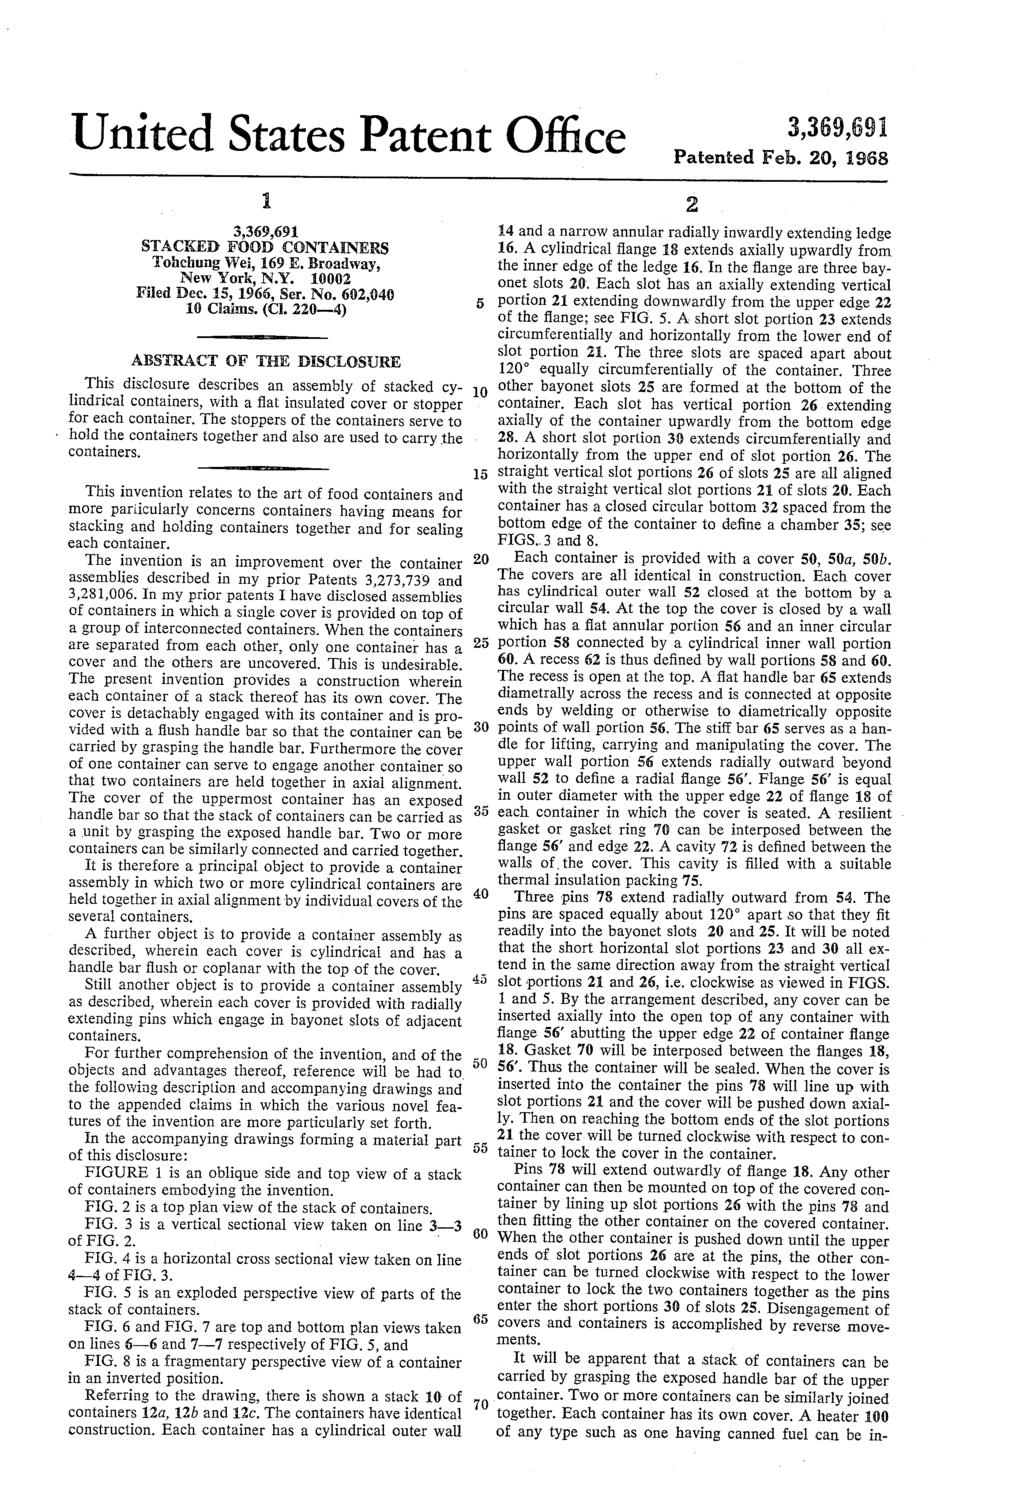 United States Patent Office Patented Feb. 0, 1968 STACKED FOOD COTAIERS Tohchung Wei, 169 E. Broadway, ew York,.Y. 1000 Filed Dec. 15, 1966, Ser. o. 60,040 10 Claims. (C.